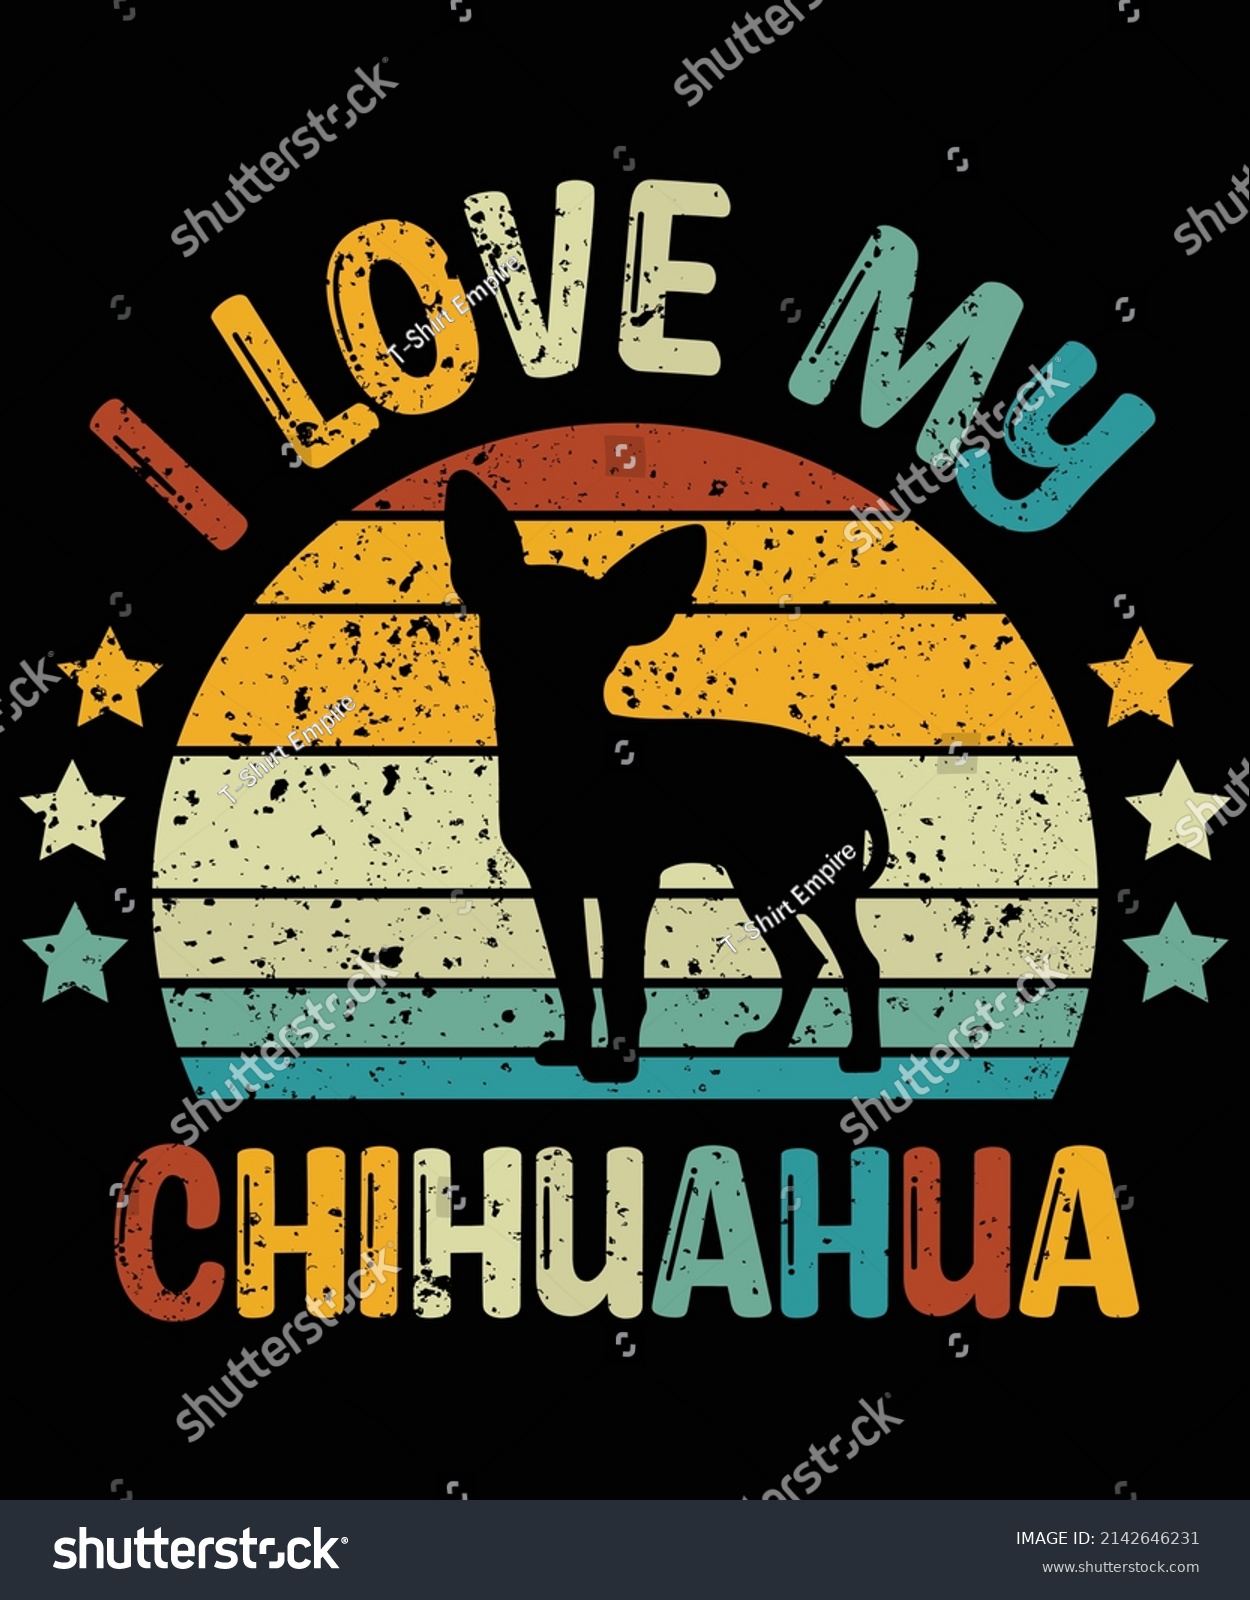 SVG of Chihuahua silhouette vintage and retro t-shirt design svg